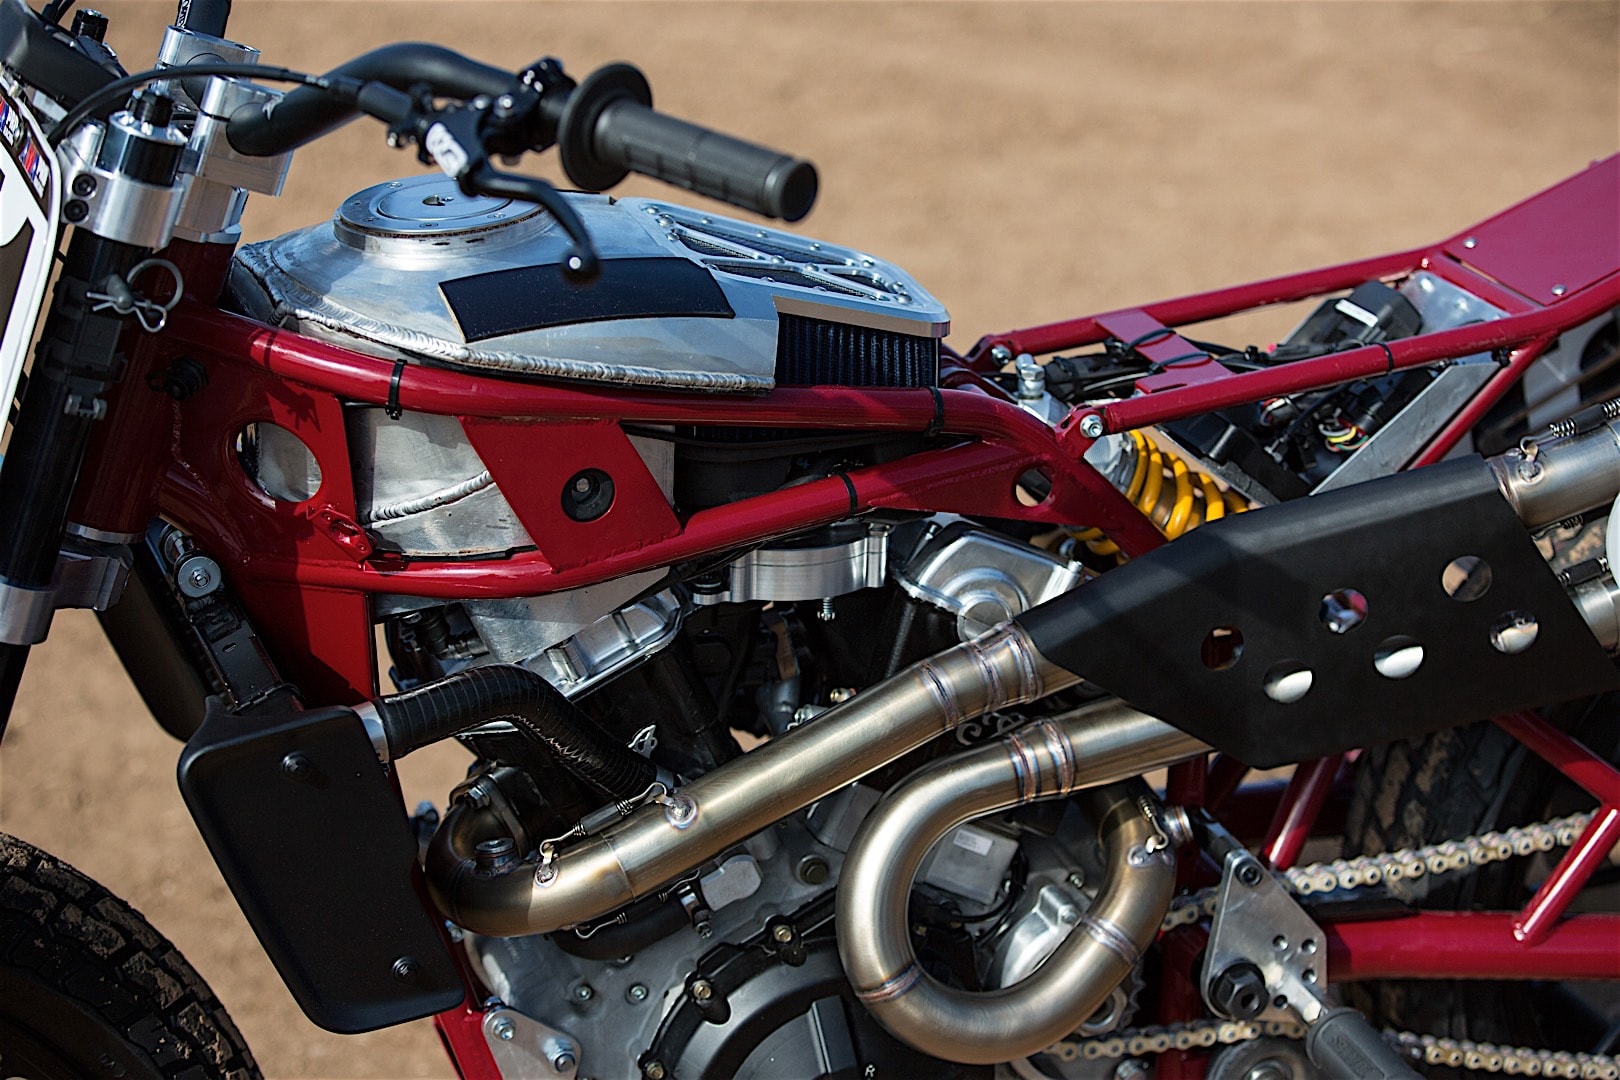 Indian Scout Ftr750 Debuting At Santa Rosa Flat Track Race This Month Autoevolution